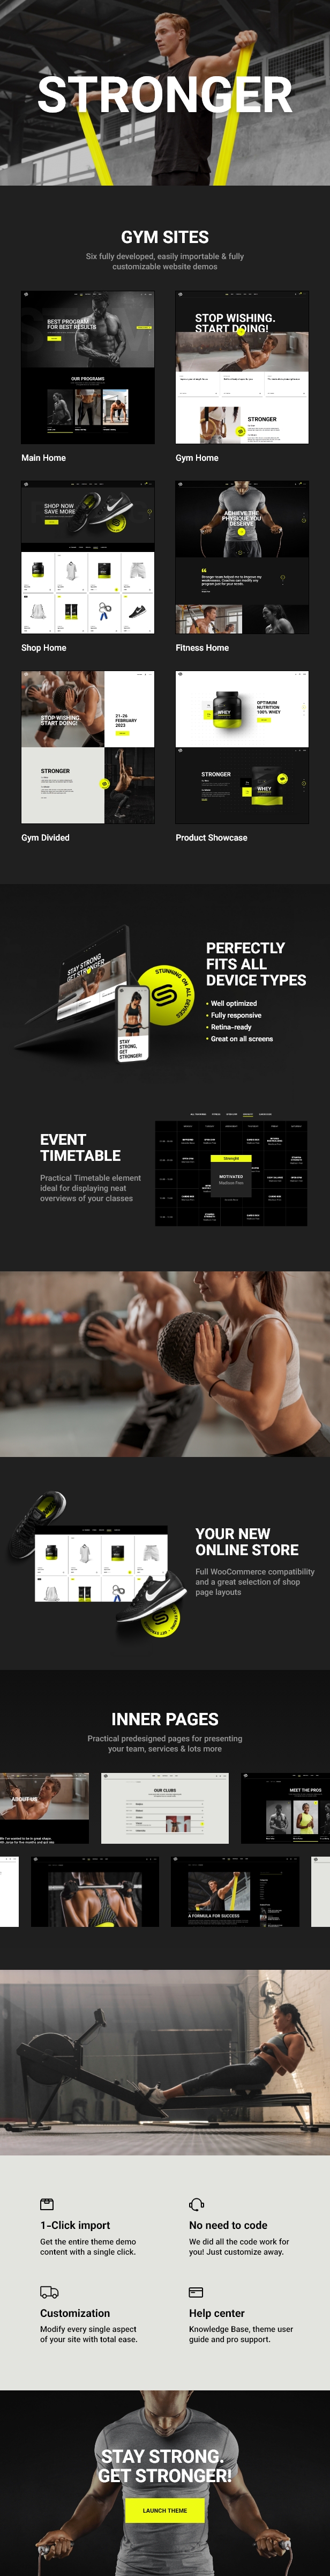 Stronger - Gym and Fitness Theme - 2